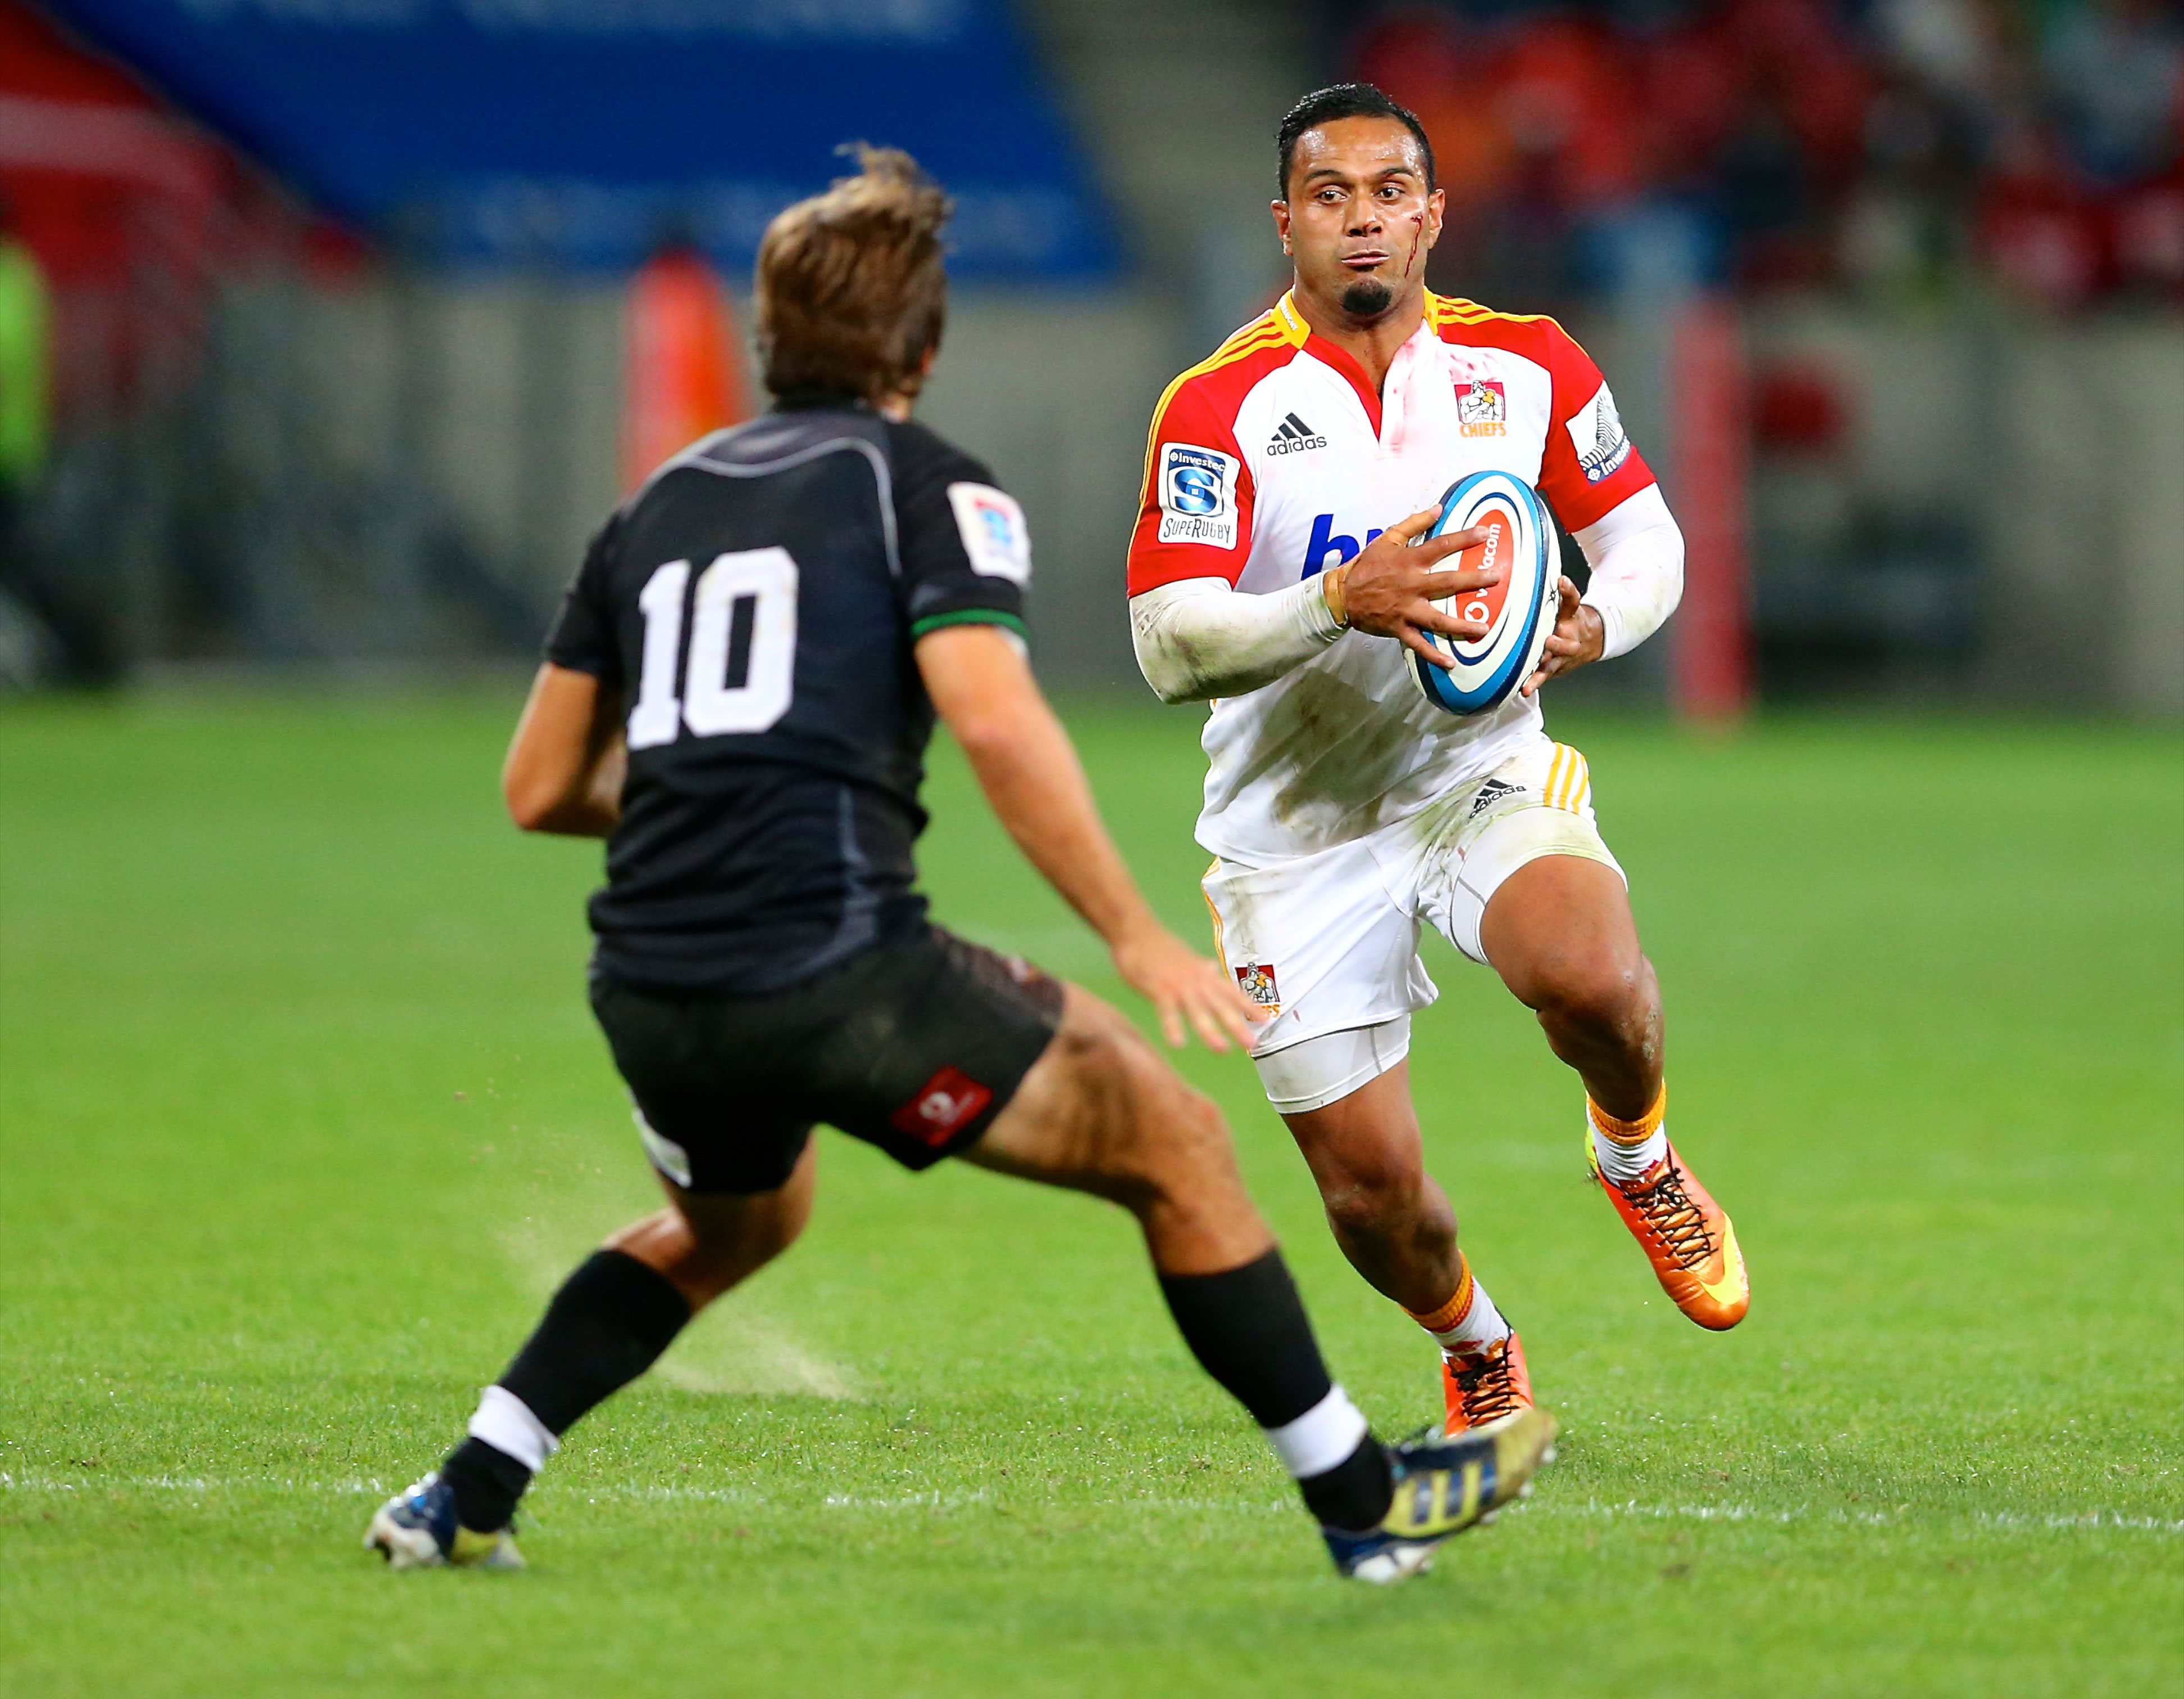 The Chiefs' Lelia Masaga on attack against Southern Kings